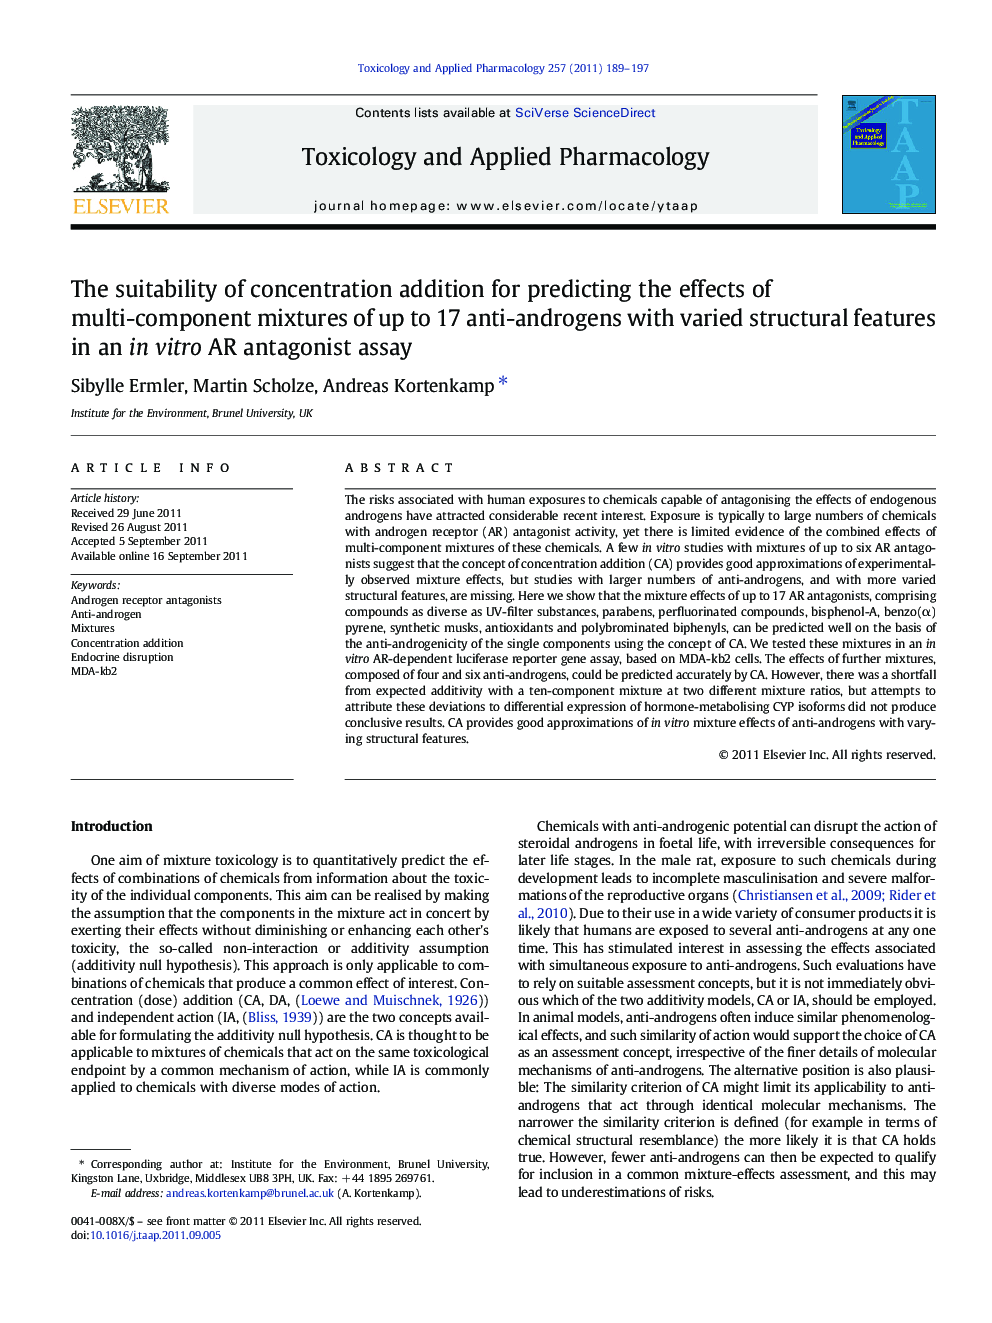 The suitability of concentration addition for predicting the effects of multi-component mixtures of up to 17 anti-androgens with varied structural features in an in vitro AR antagonist assay